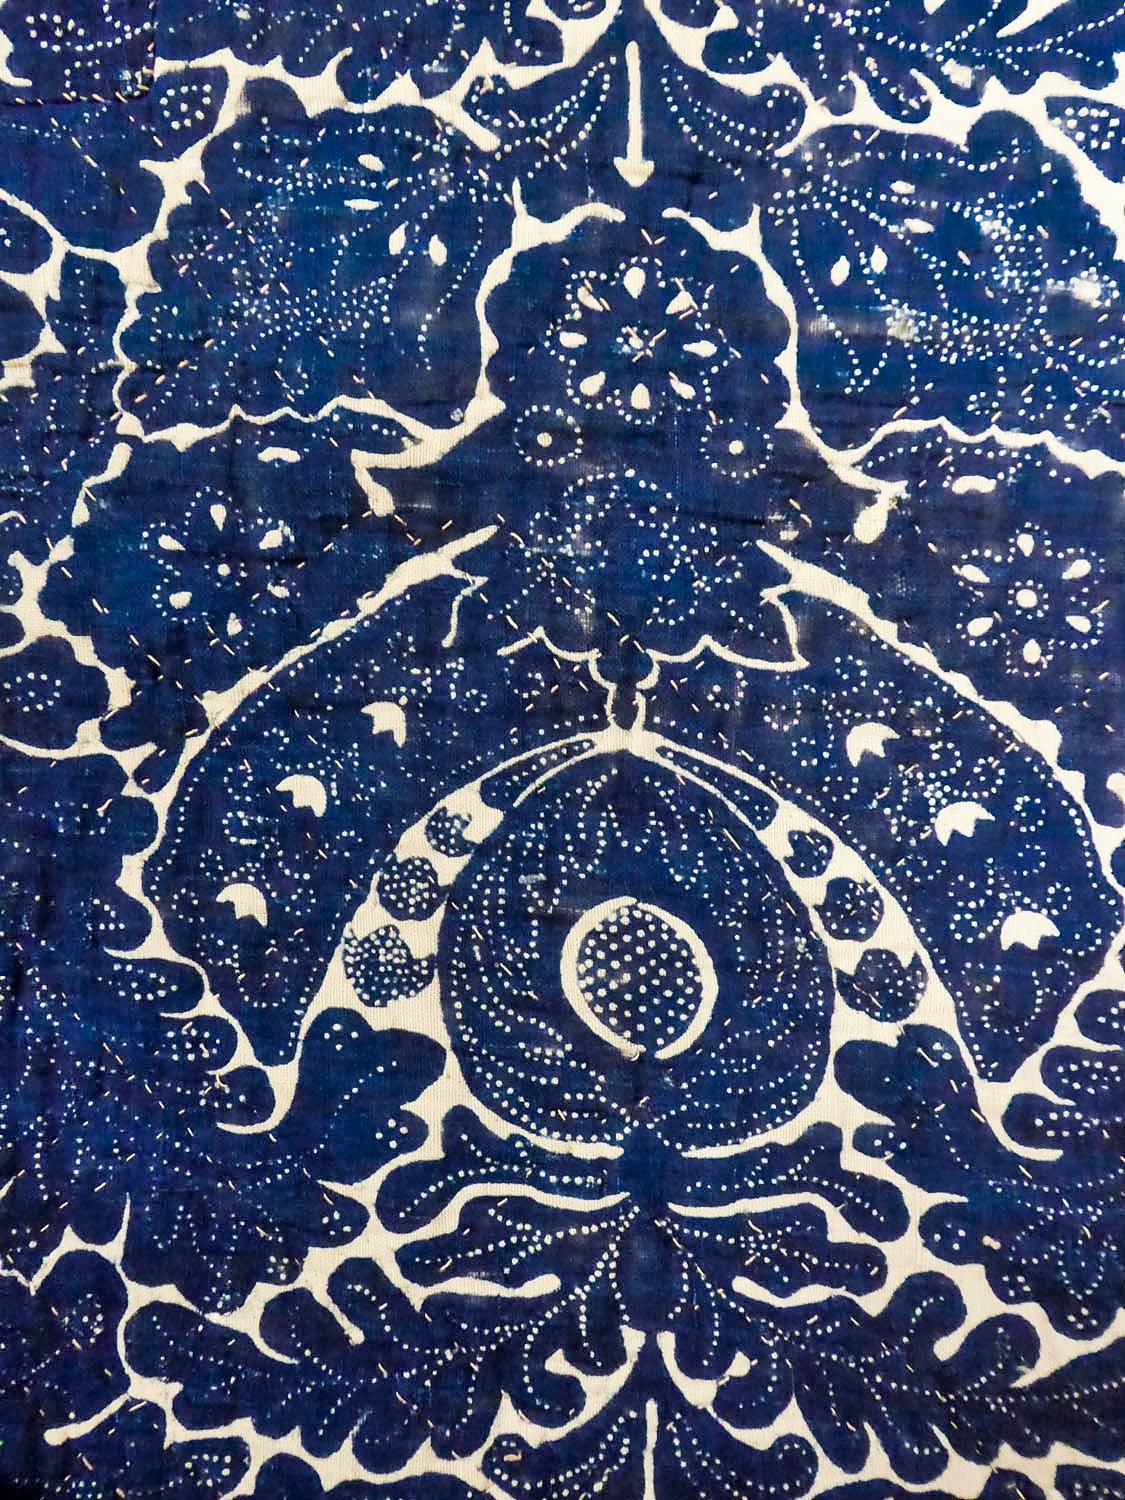 Women's or Men's A french 18th indigo wax resist-dying quilt - Provence Circa 1780